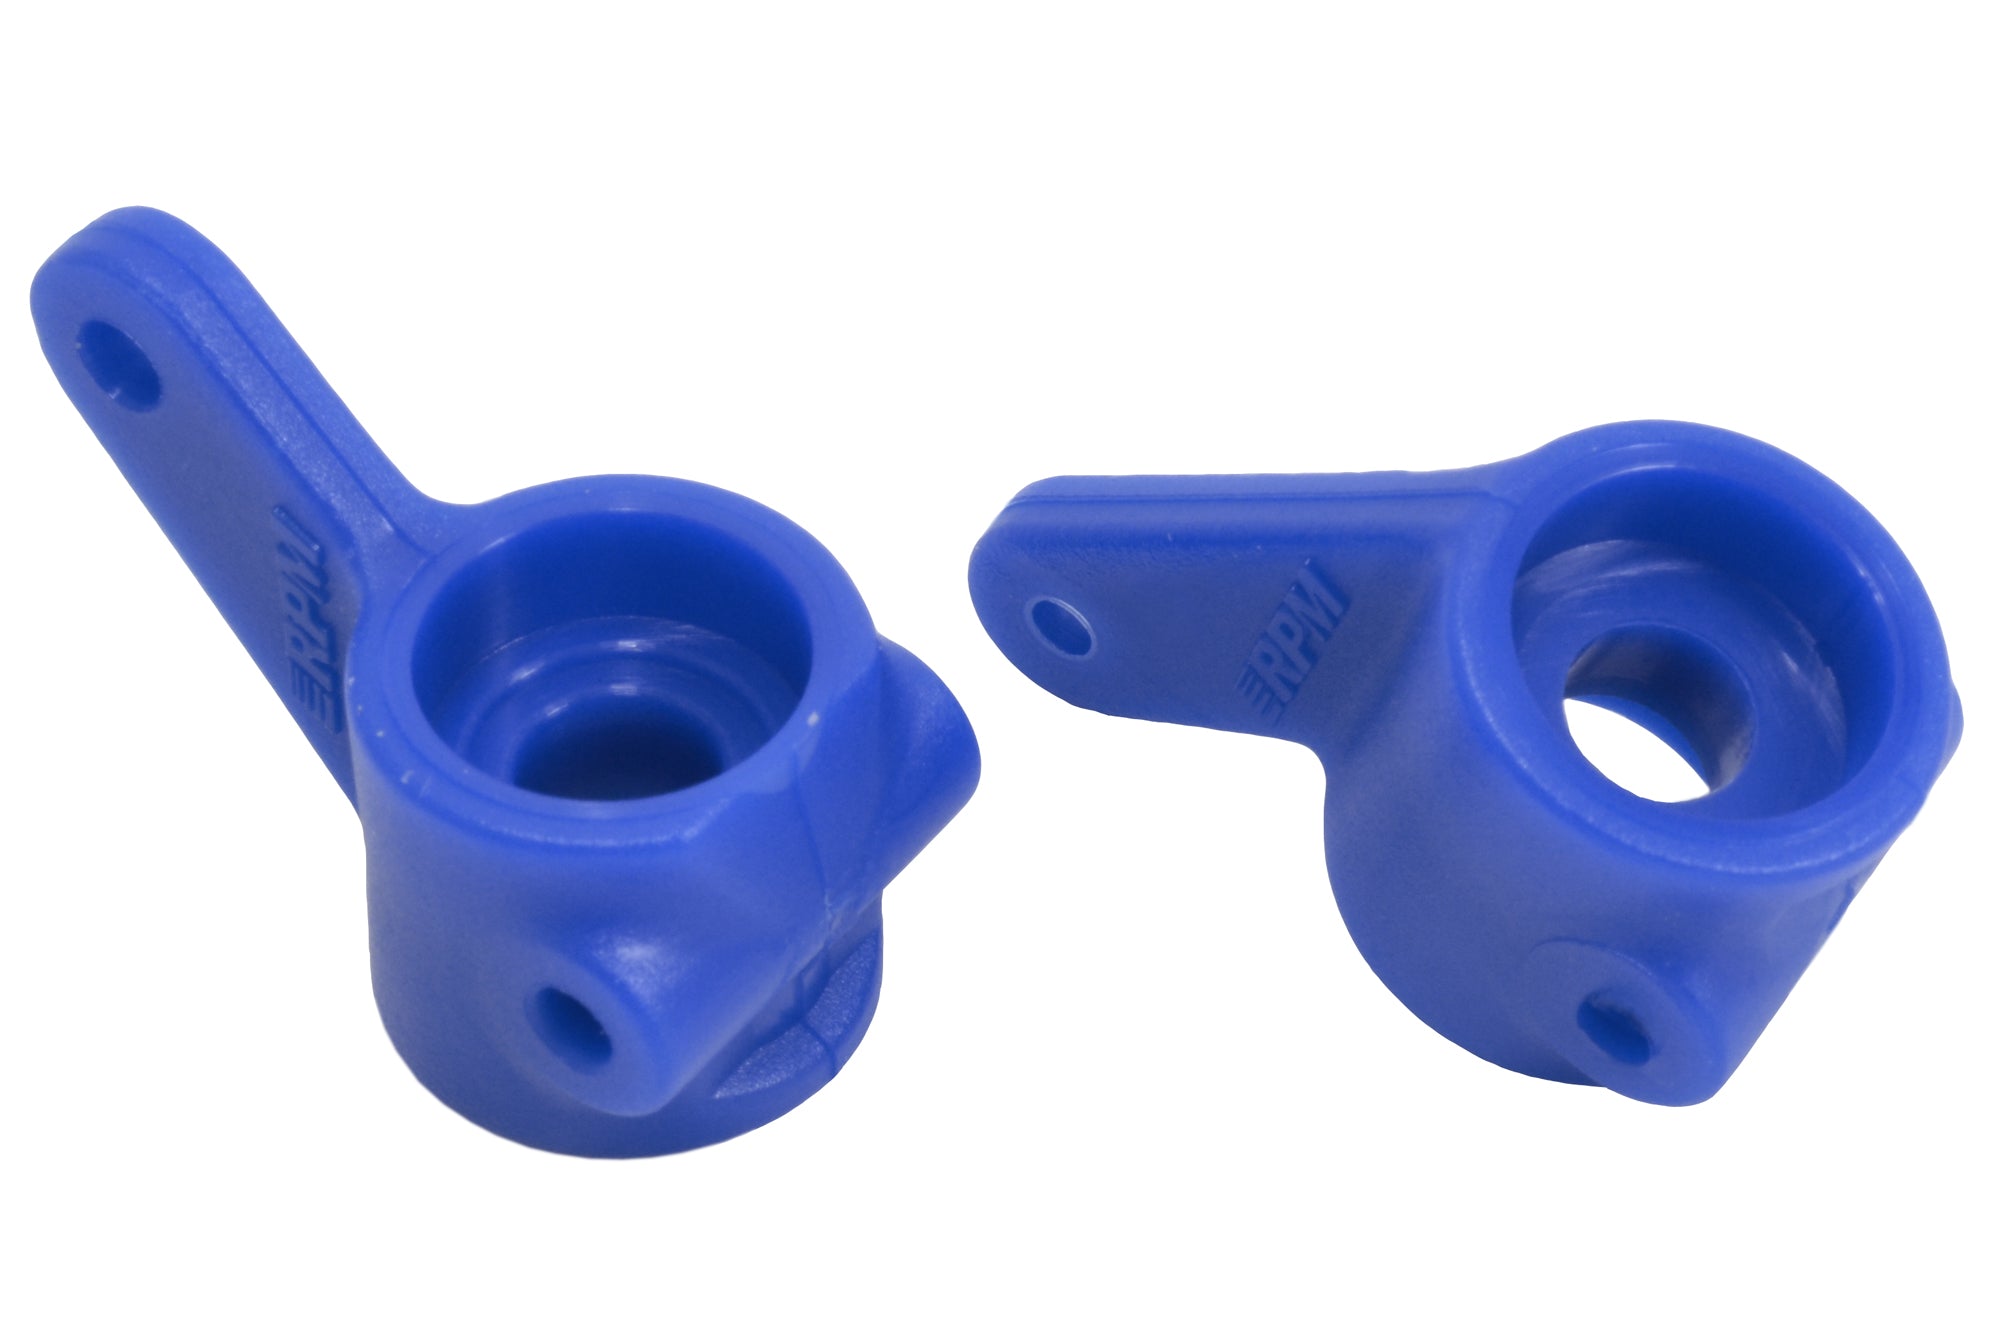 RPM RC Products: Front Bearing Carriers for the Traxxas Slash 2wd, Nitro Slash, e-Stampede 2wd & e-Rustler